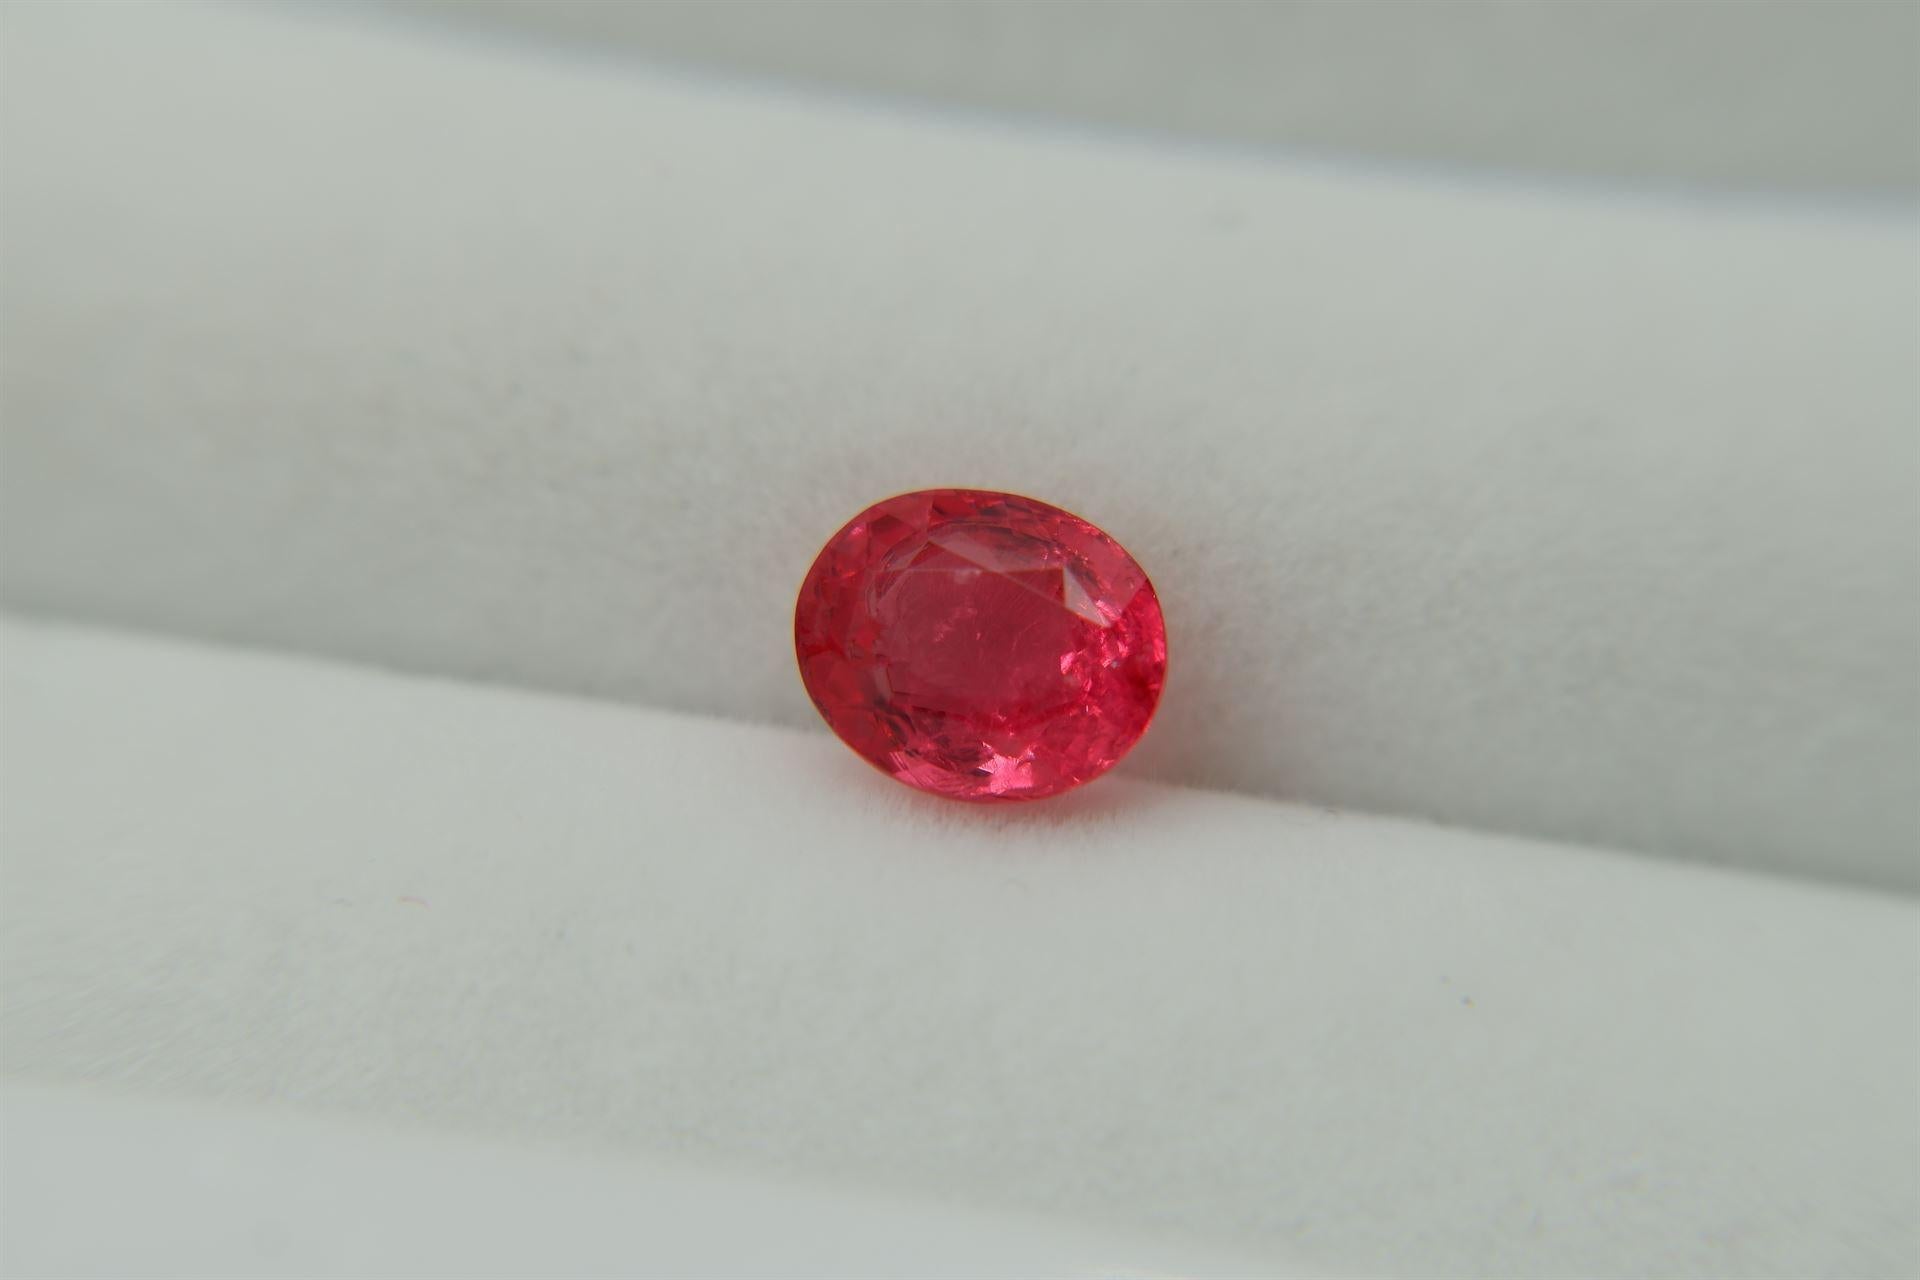 GEMSTONE TYPE: Unheated Natural Spinel
RECOMMENDED JEWELRY SETTINGS: Men Rings, Men Jewelry, Women Vintage Rings, Art Jewelry, RARE Rings, RARE Jewelry
CERTIFICATE: AGL/GIA Full Lab Report included
ORIGIN: Tanzania
CARAT SIZE: 1.581
DIMENSIONS: